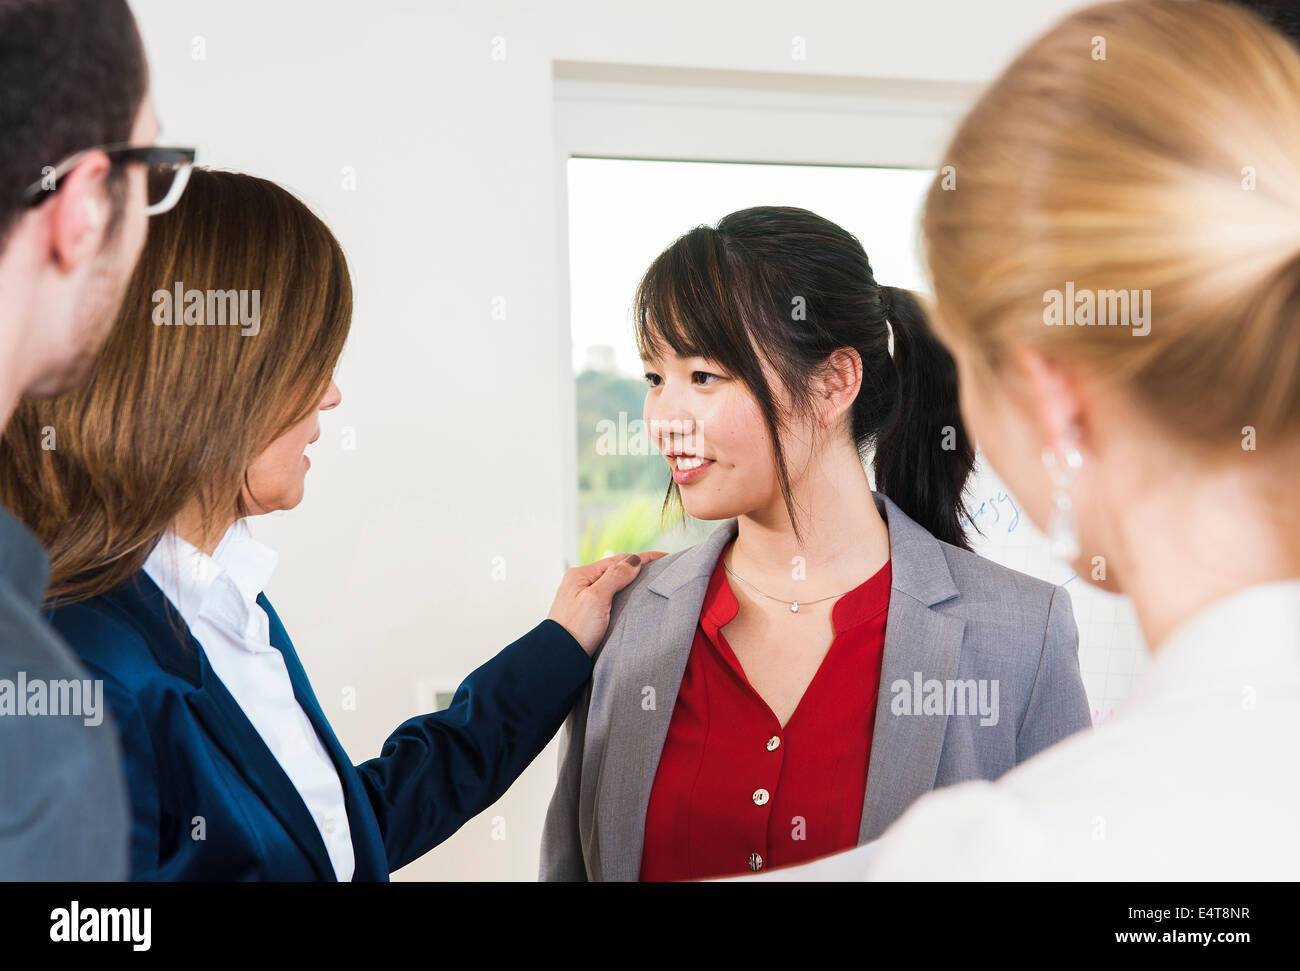 Group of young business people and businesswoman in discussion in office, young business woman being congratulated, Germany Stock Photo